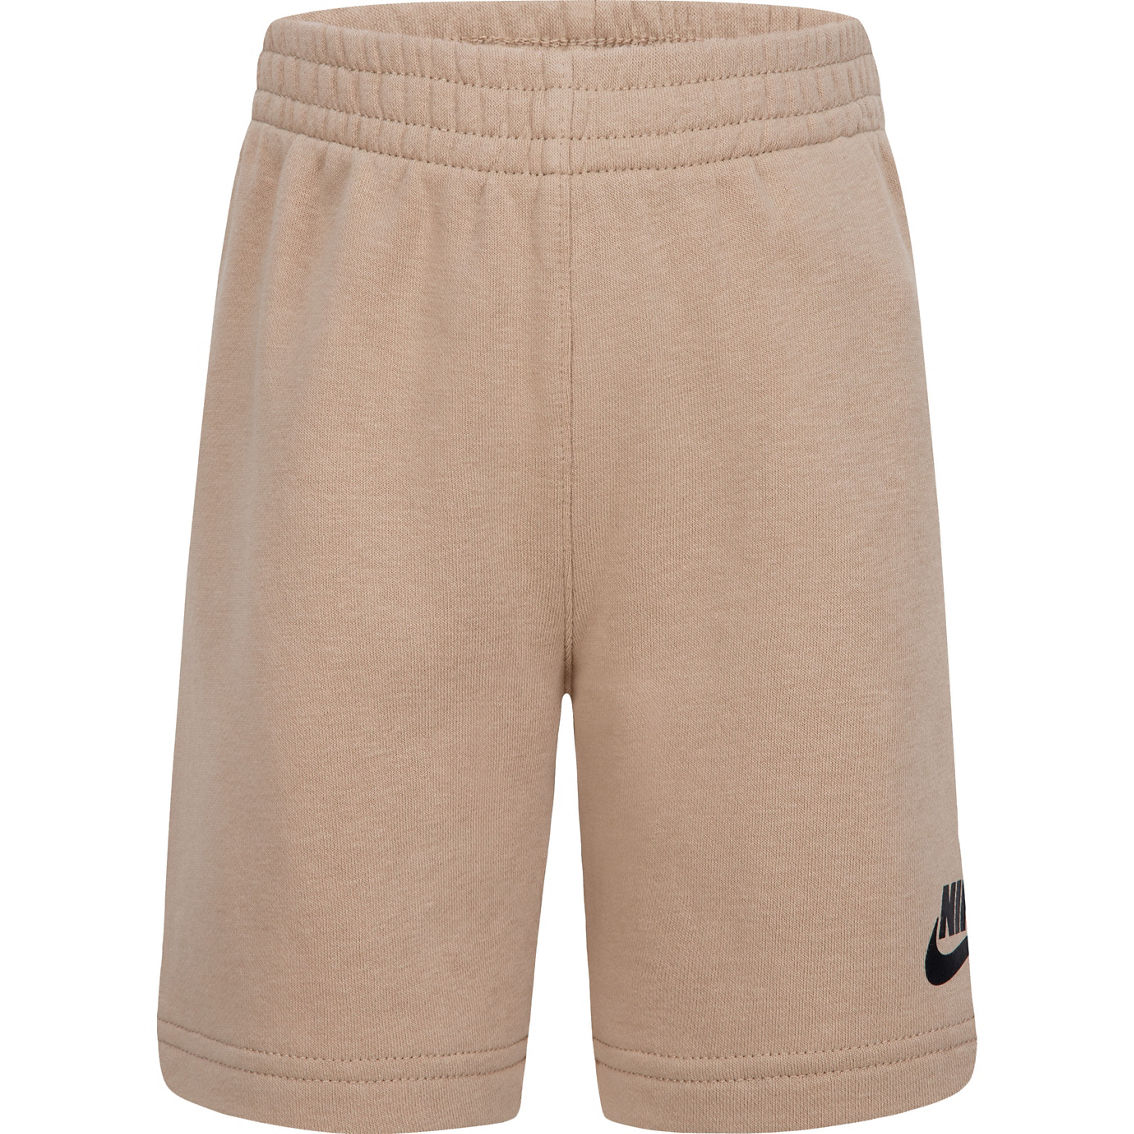 Nike Little Boys NSW Paint Tee and Shorts 2 pc. Set - Image 3 of 6